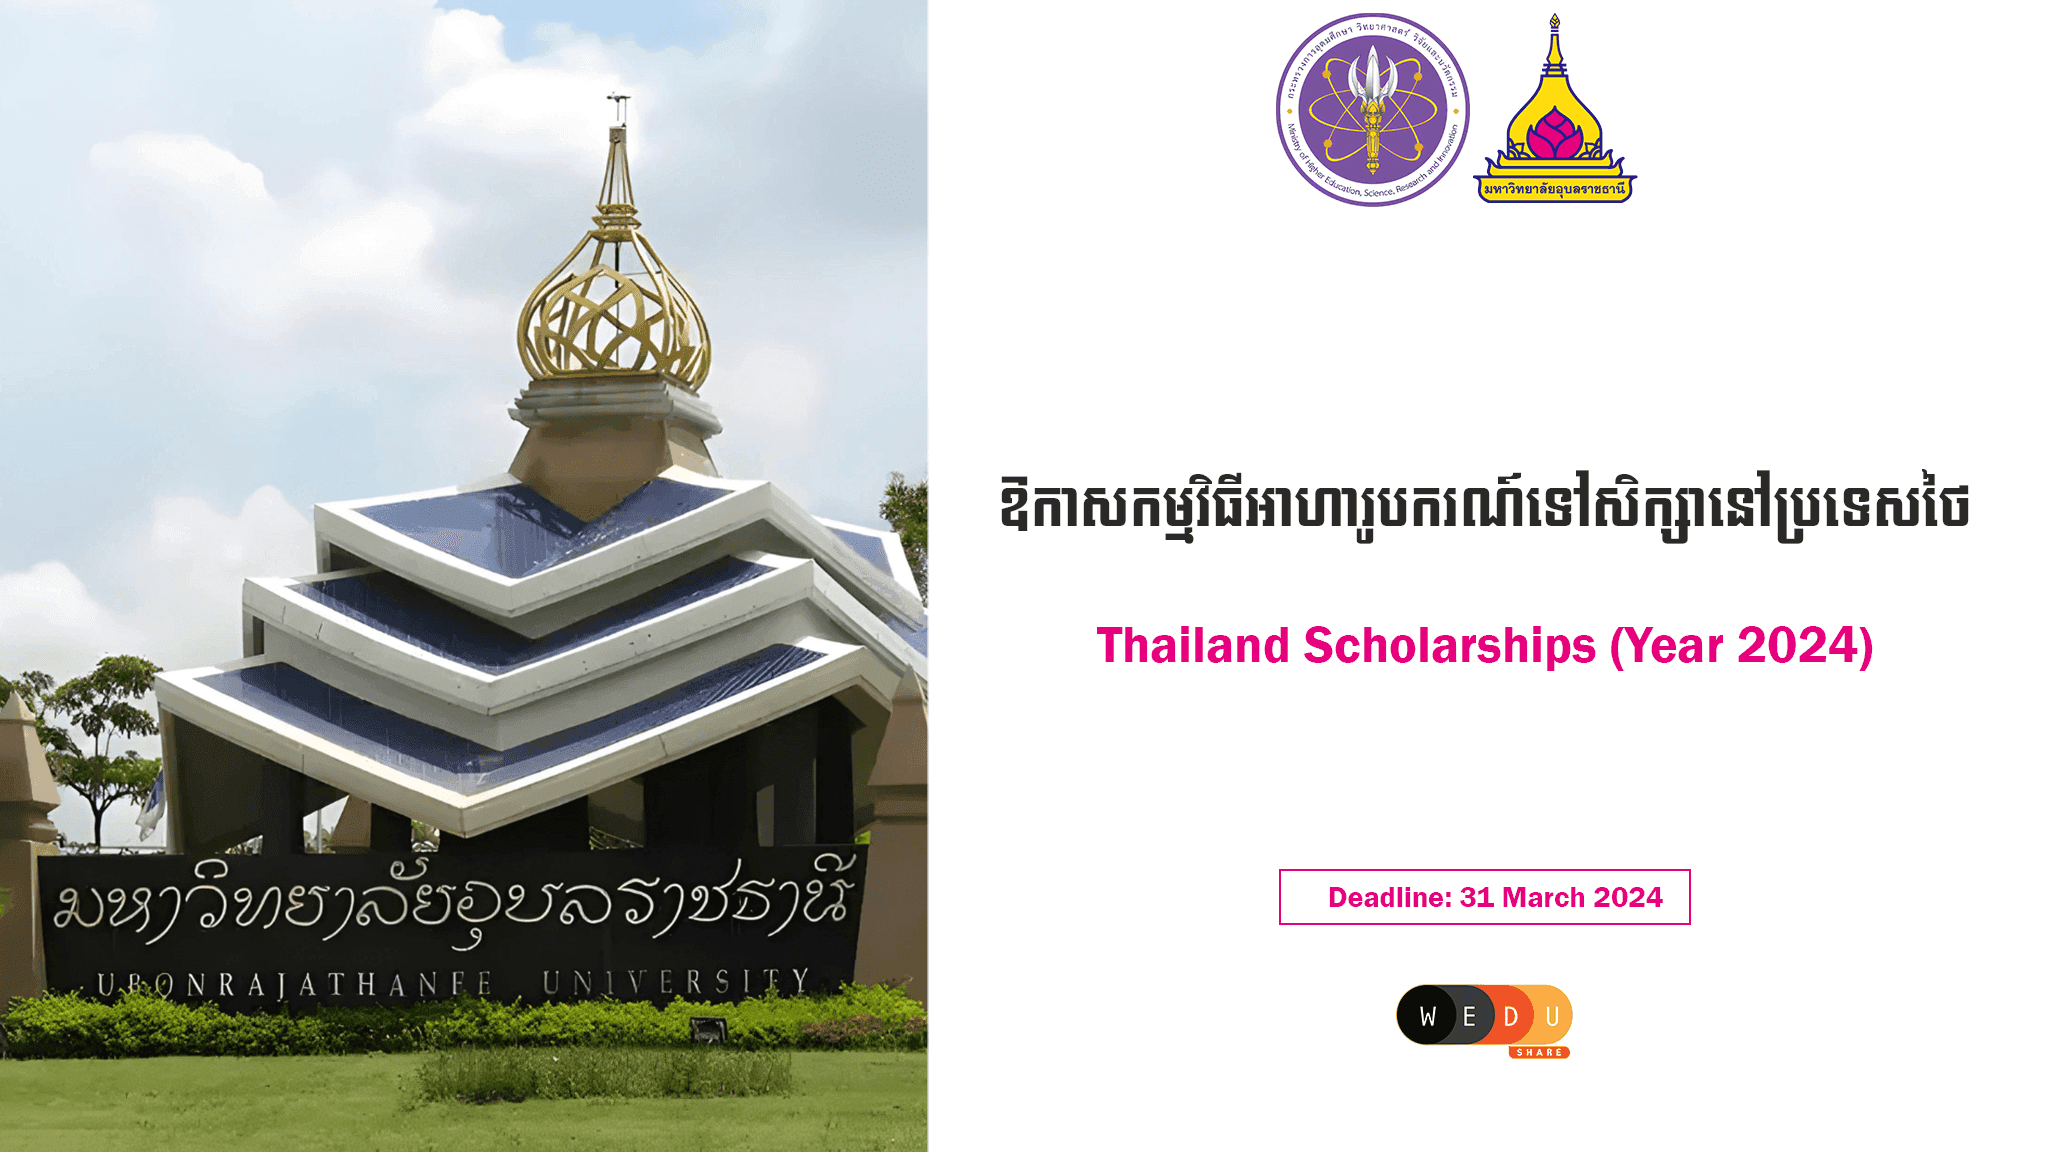 Thailand Scholarships (Year 2024) for international students